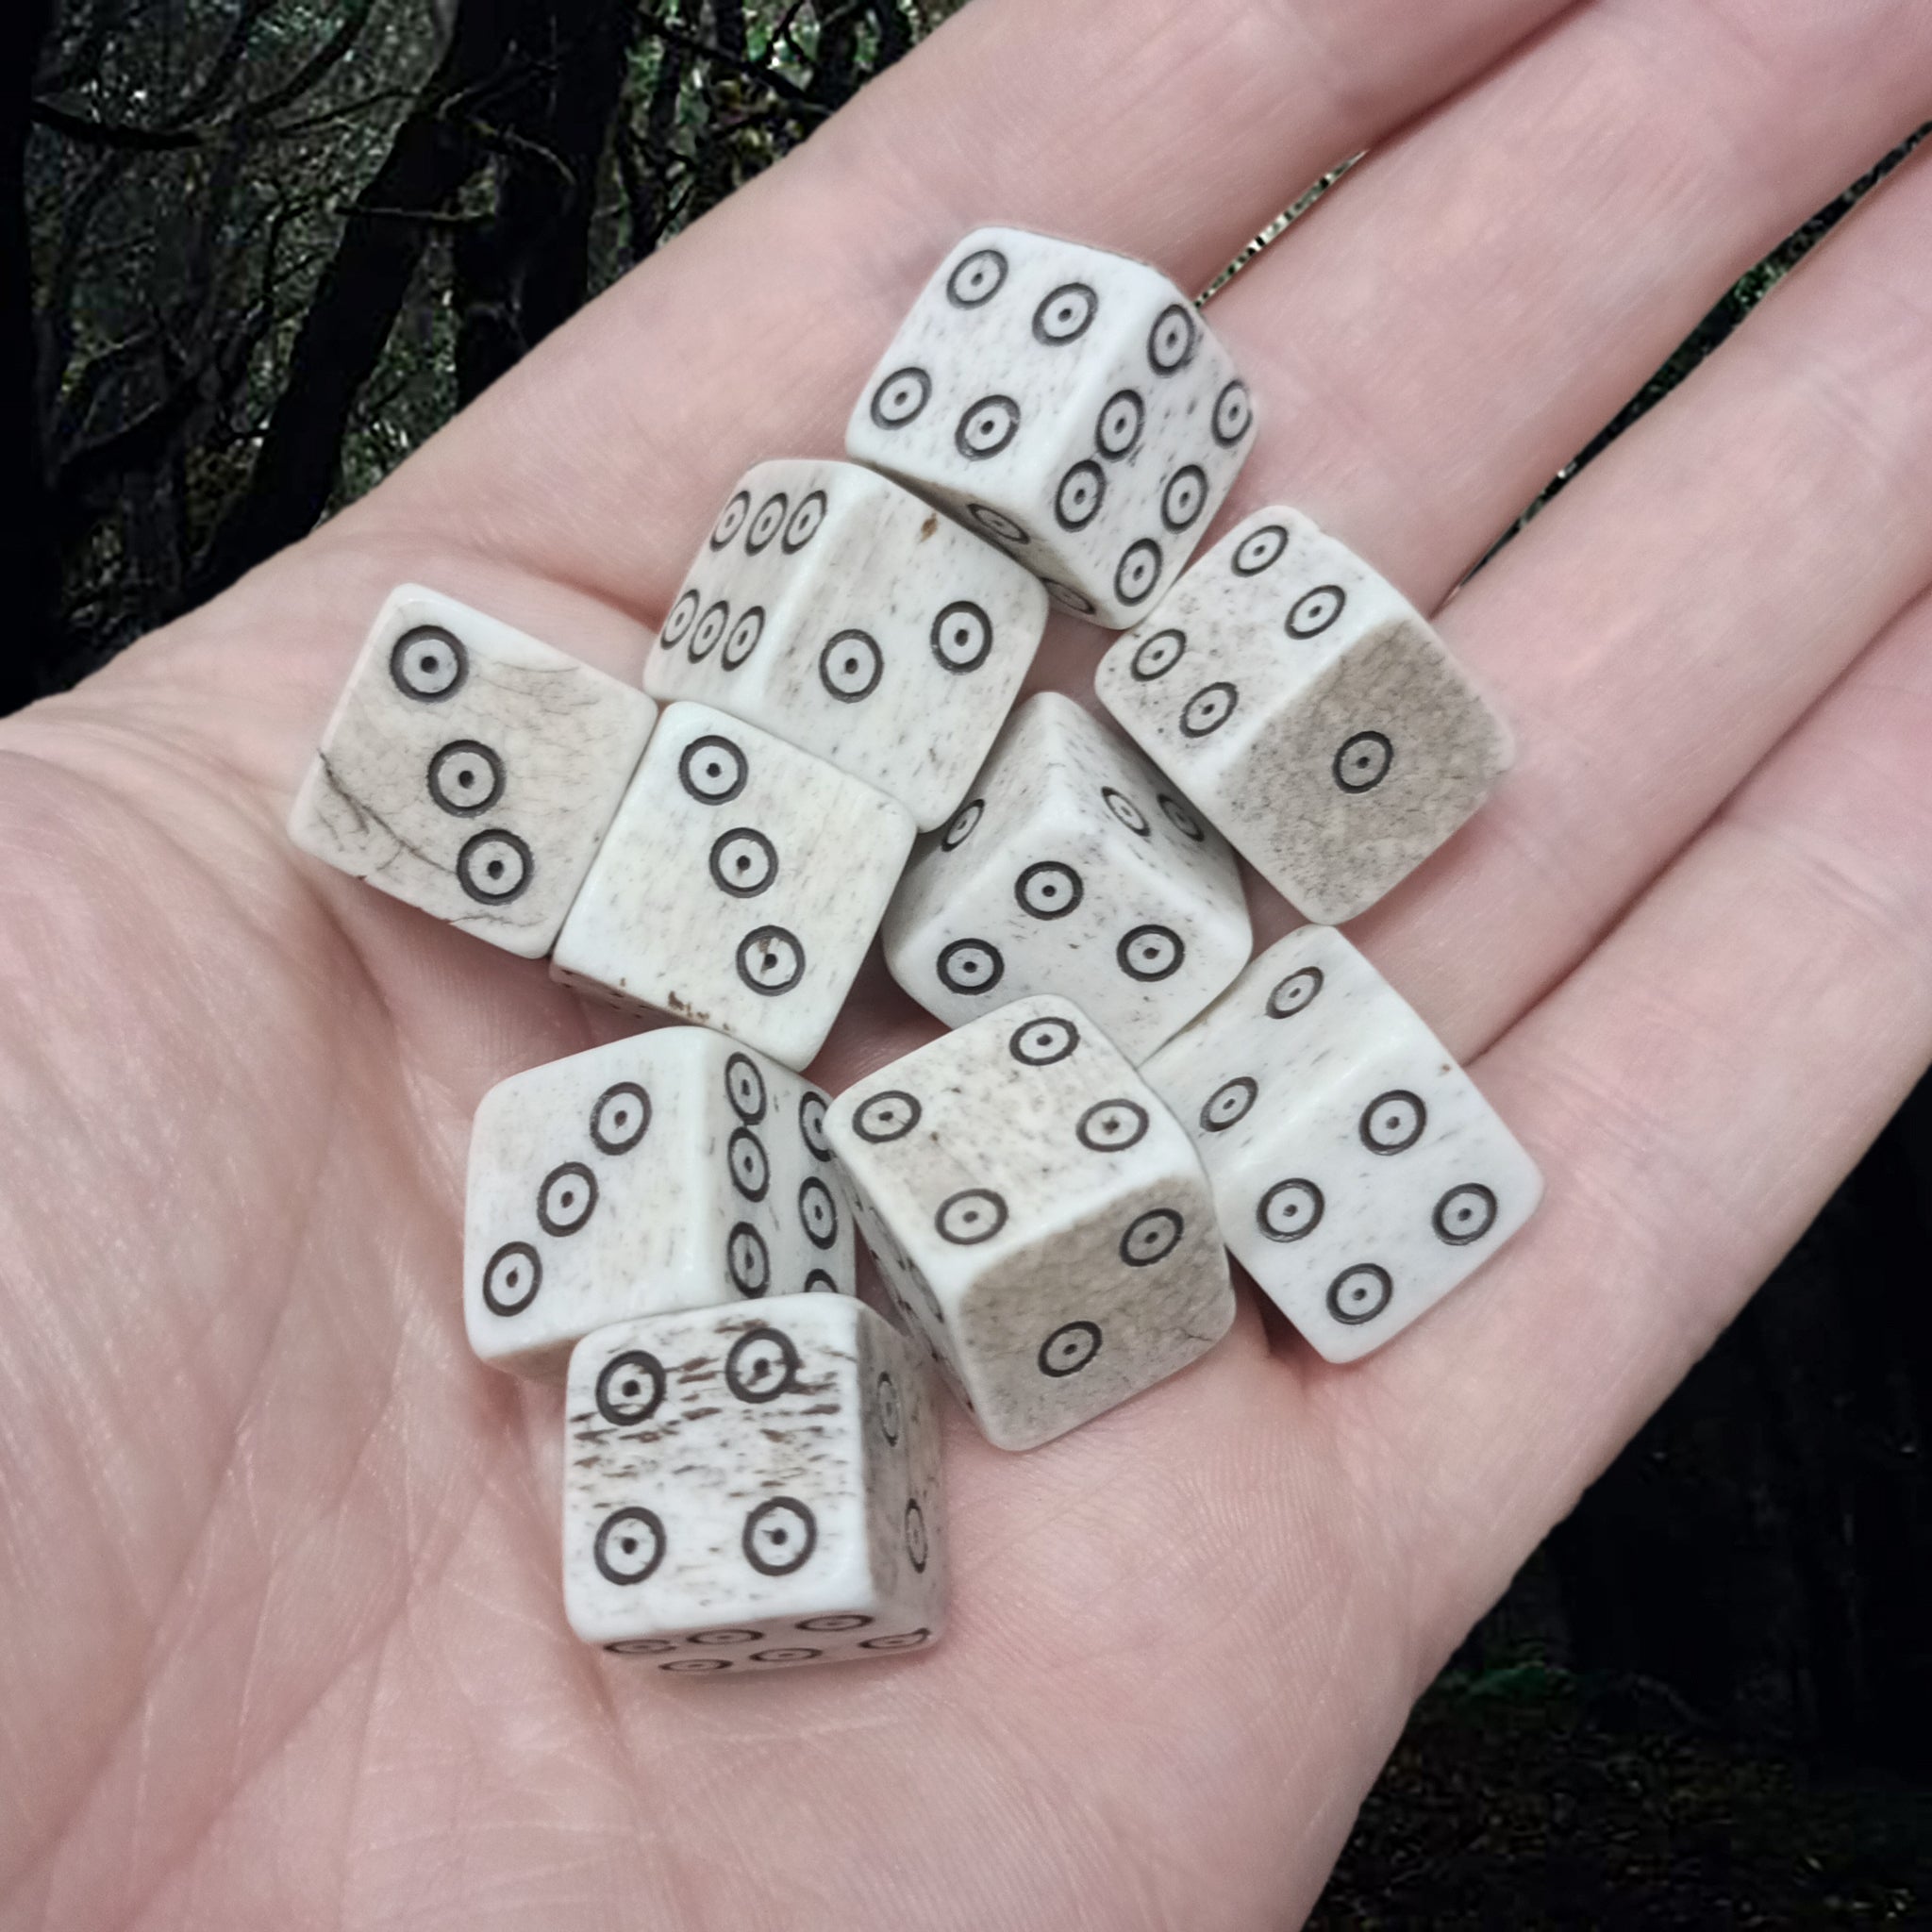 Large Size Cow Bone Dice Replicas with Hand-Carved Dot & Ring Spots on Hand x 10